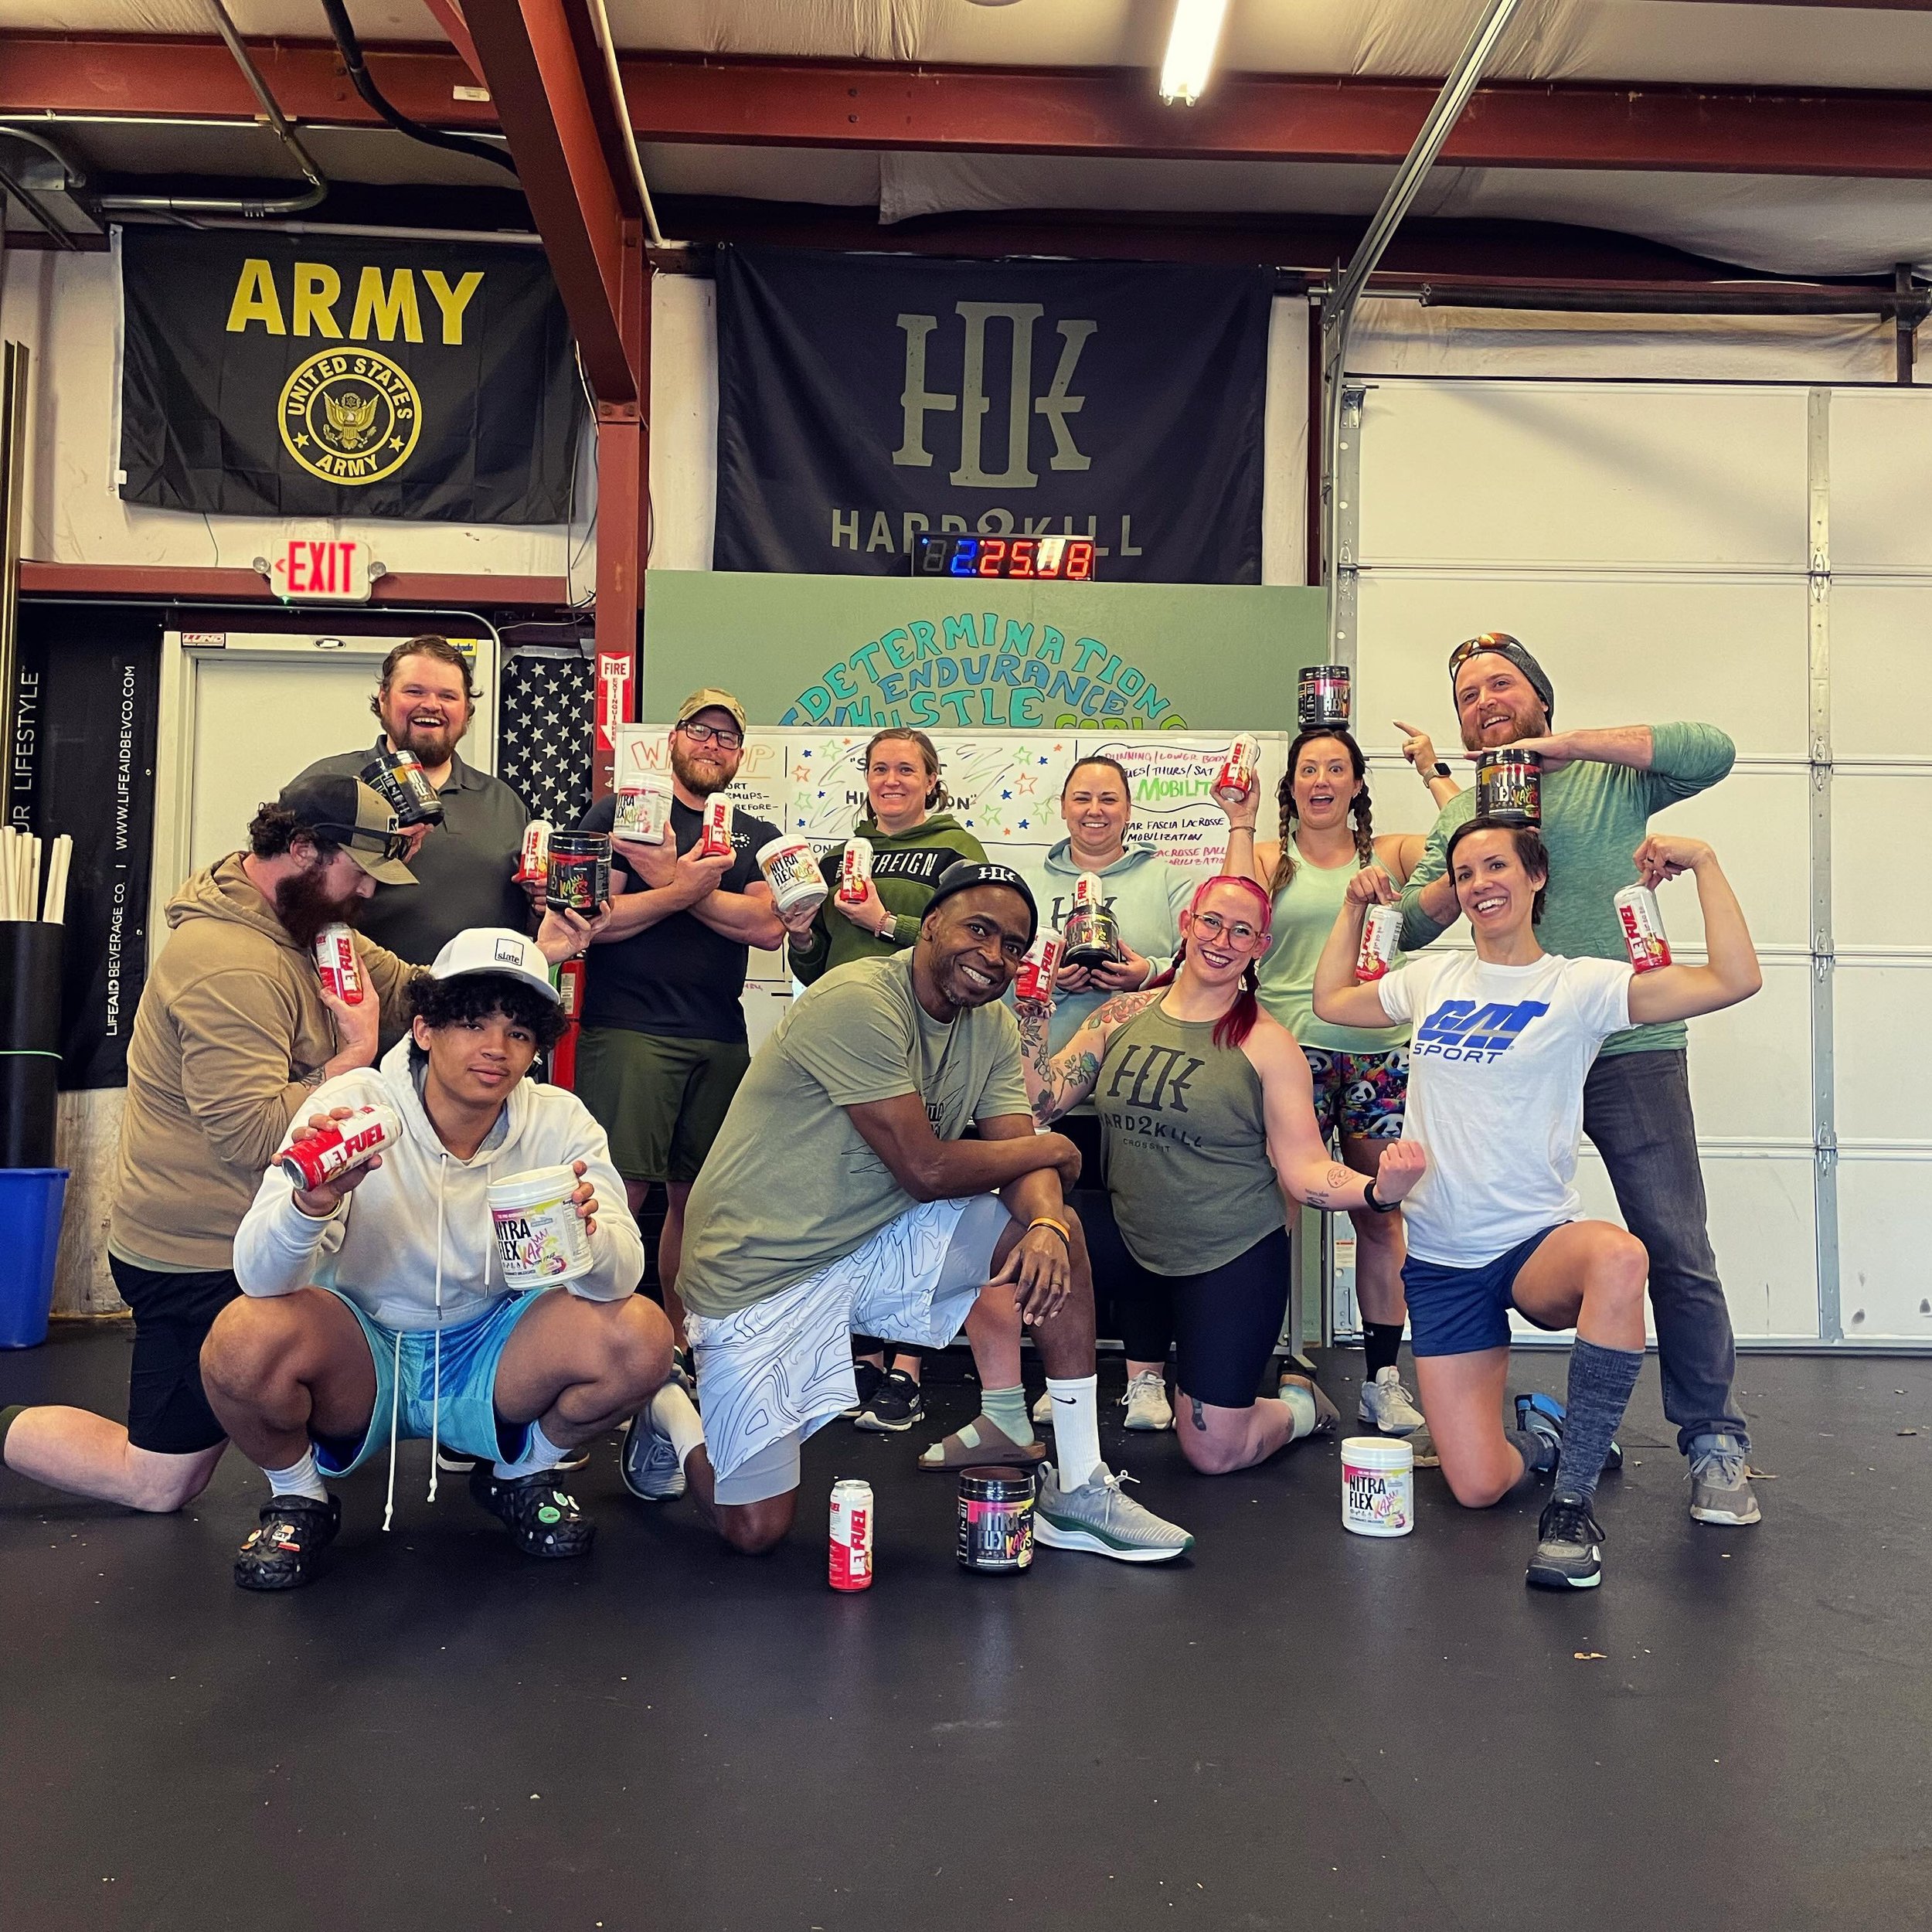 Teams: Spring Cleaning, Carmel &amp; Dark Chocolate, We Put Up the Weight, Dyslexia, Wack A Flocka took home impressive prizes from @gatsupplements from our &ldquo;Straight Outta Hibernation&rdquo; competition last Saturday.👏🏆💪
Pssssssssttt, want 